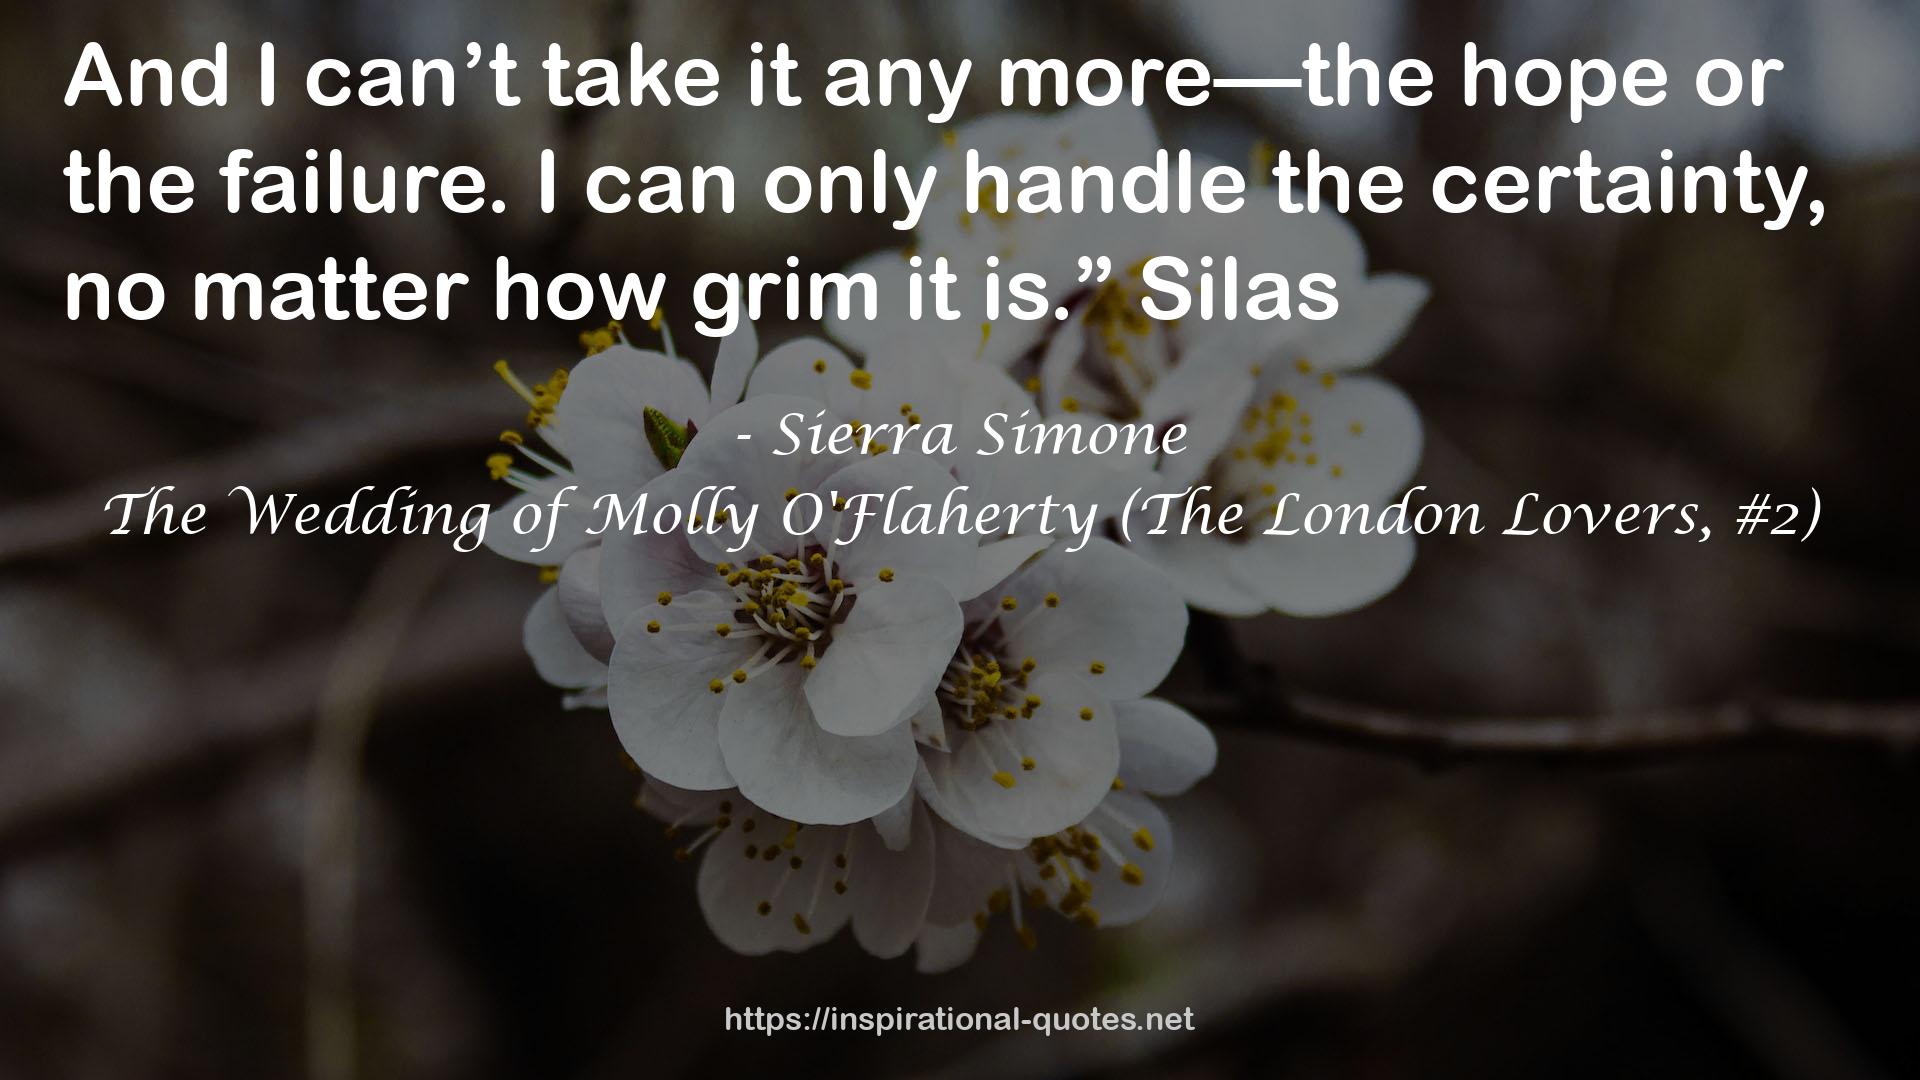 The Wedding of Molly O'Flaherty (The London Lovers, #2) QUOTES